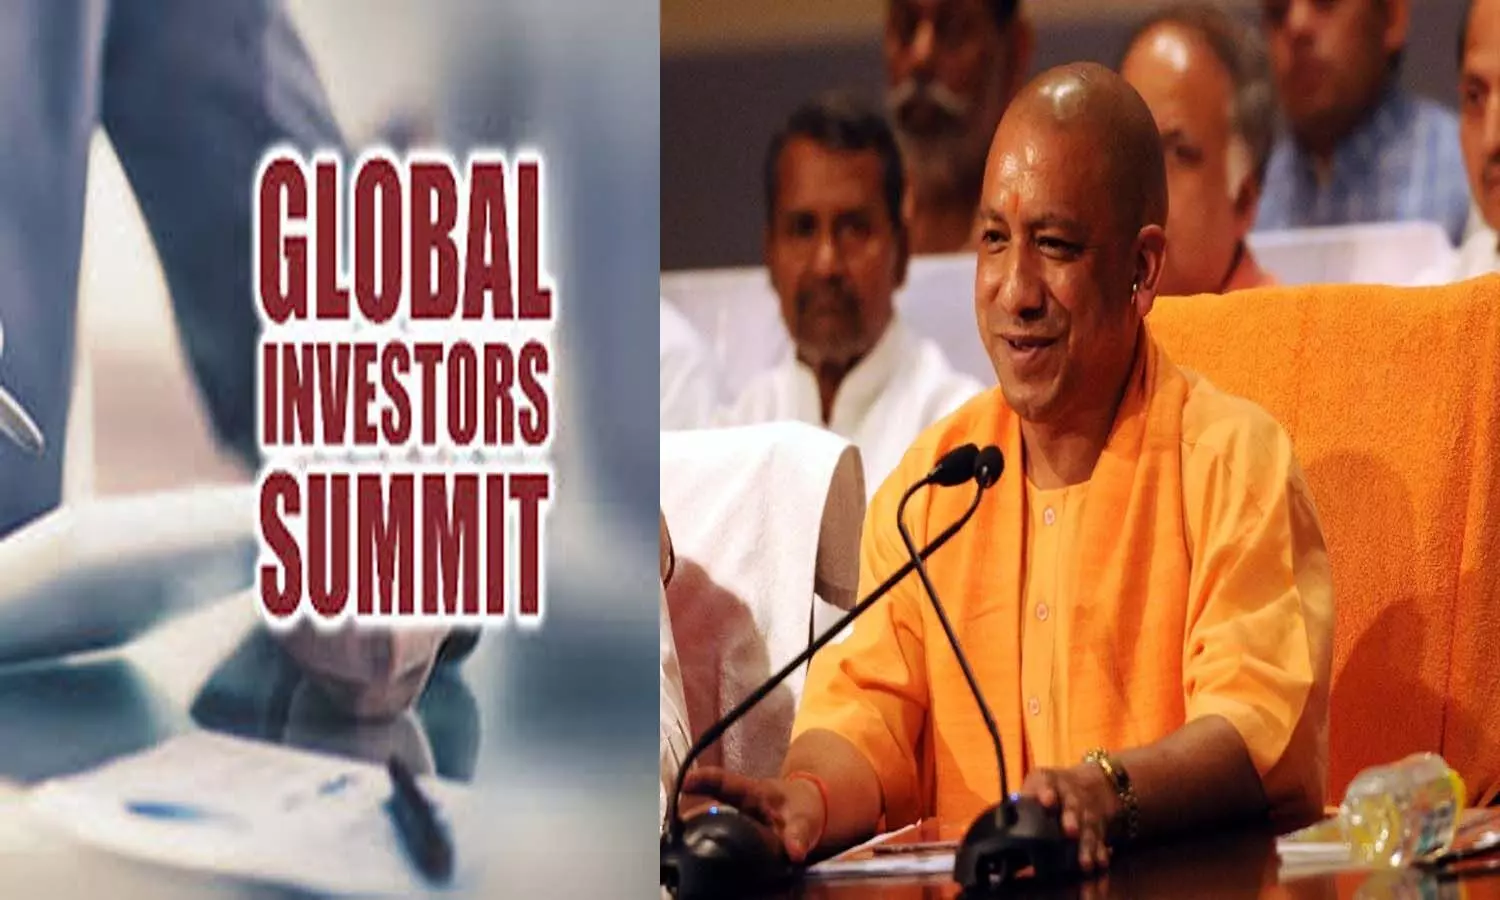 Singapore also ready to be a partner in the Global Investors Summit in Uttar Pradesh